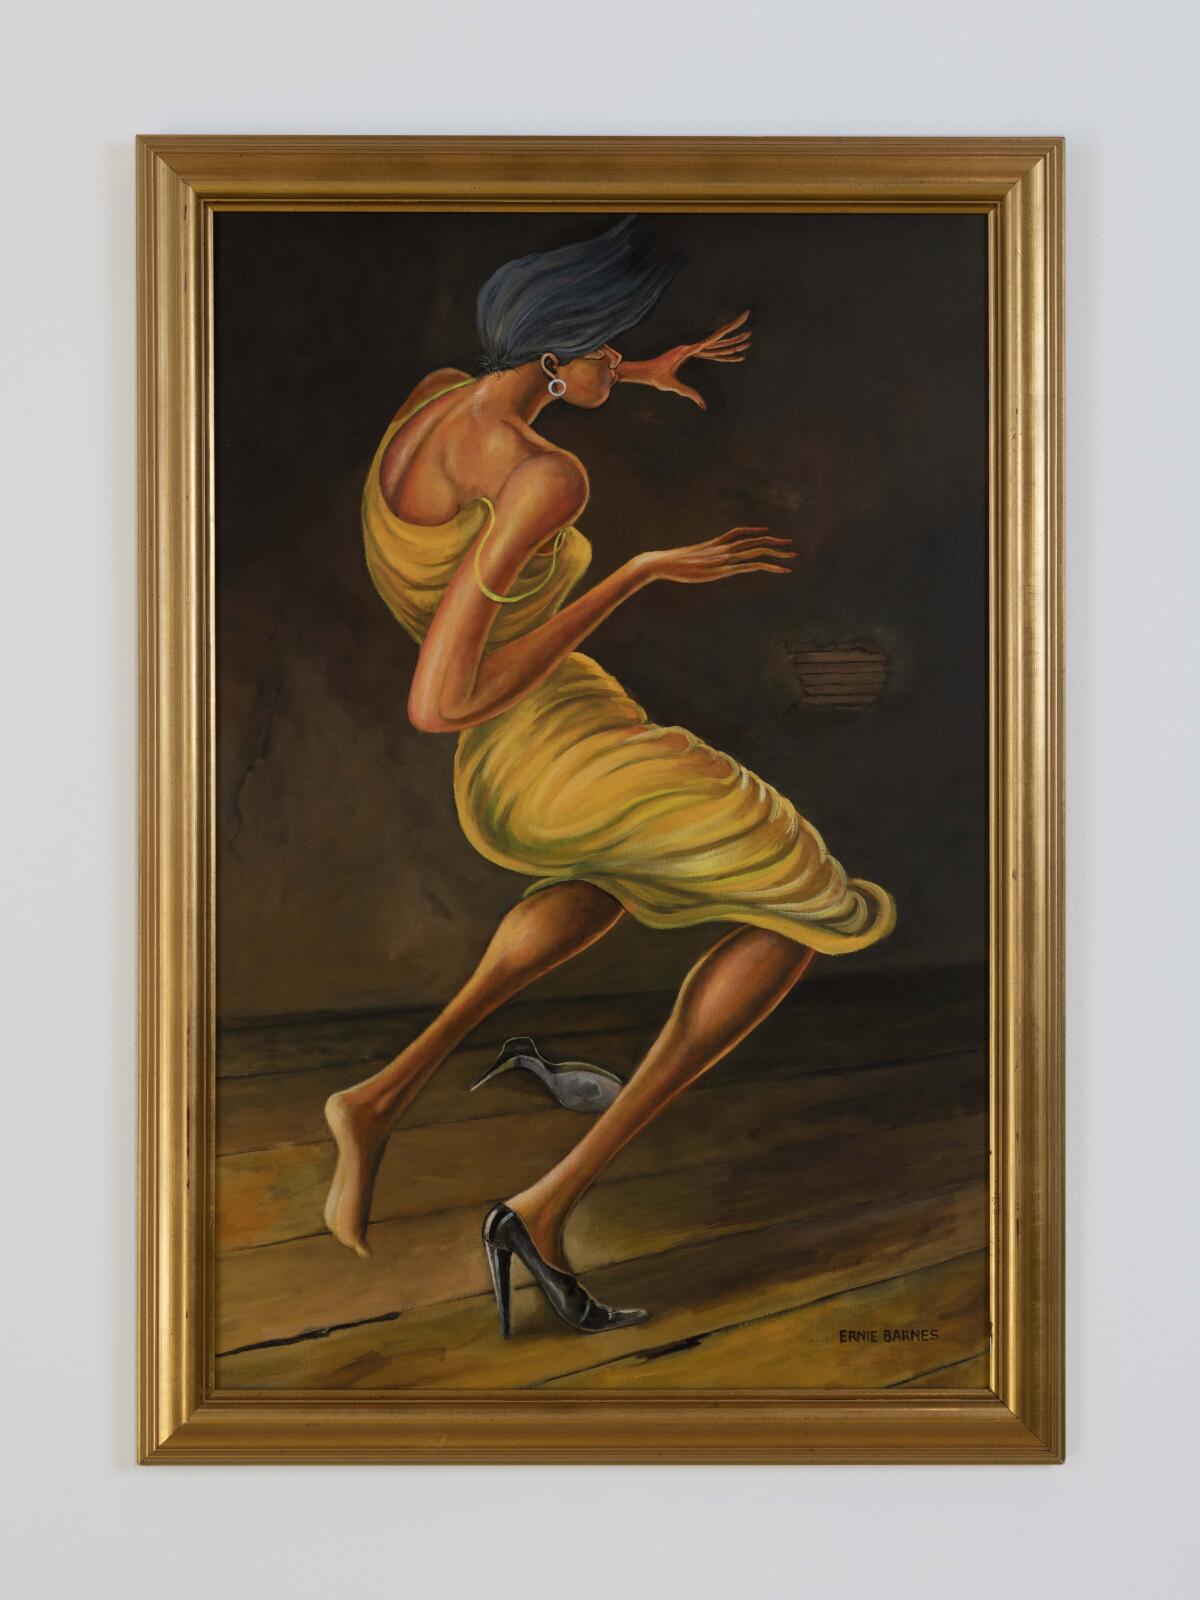 A painting of a woman in a yellow dress dancing with abandon.